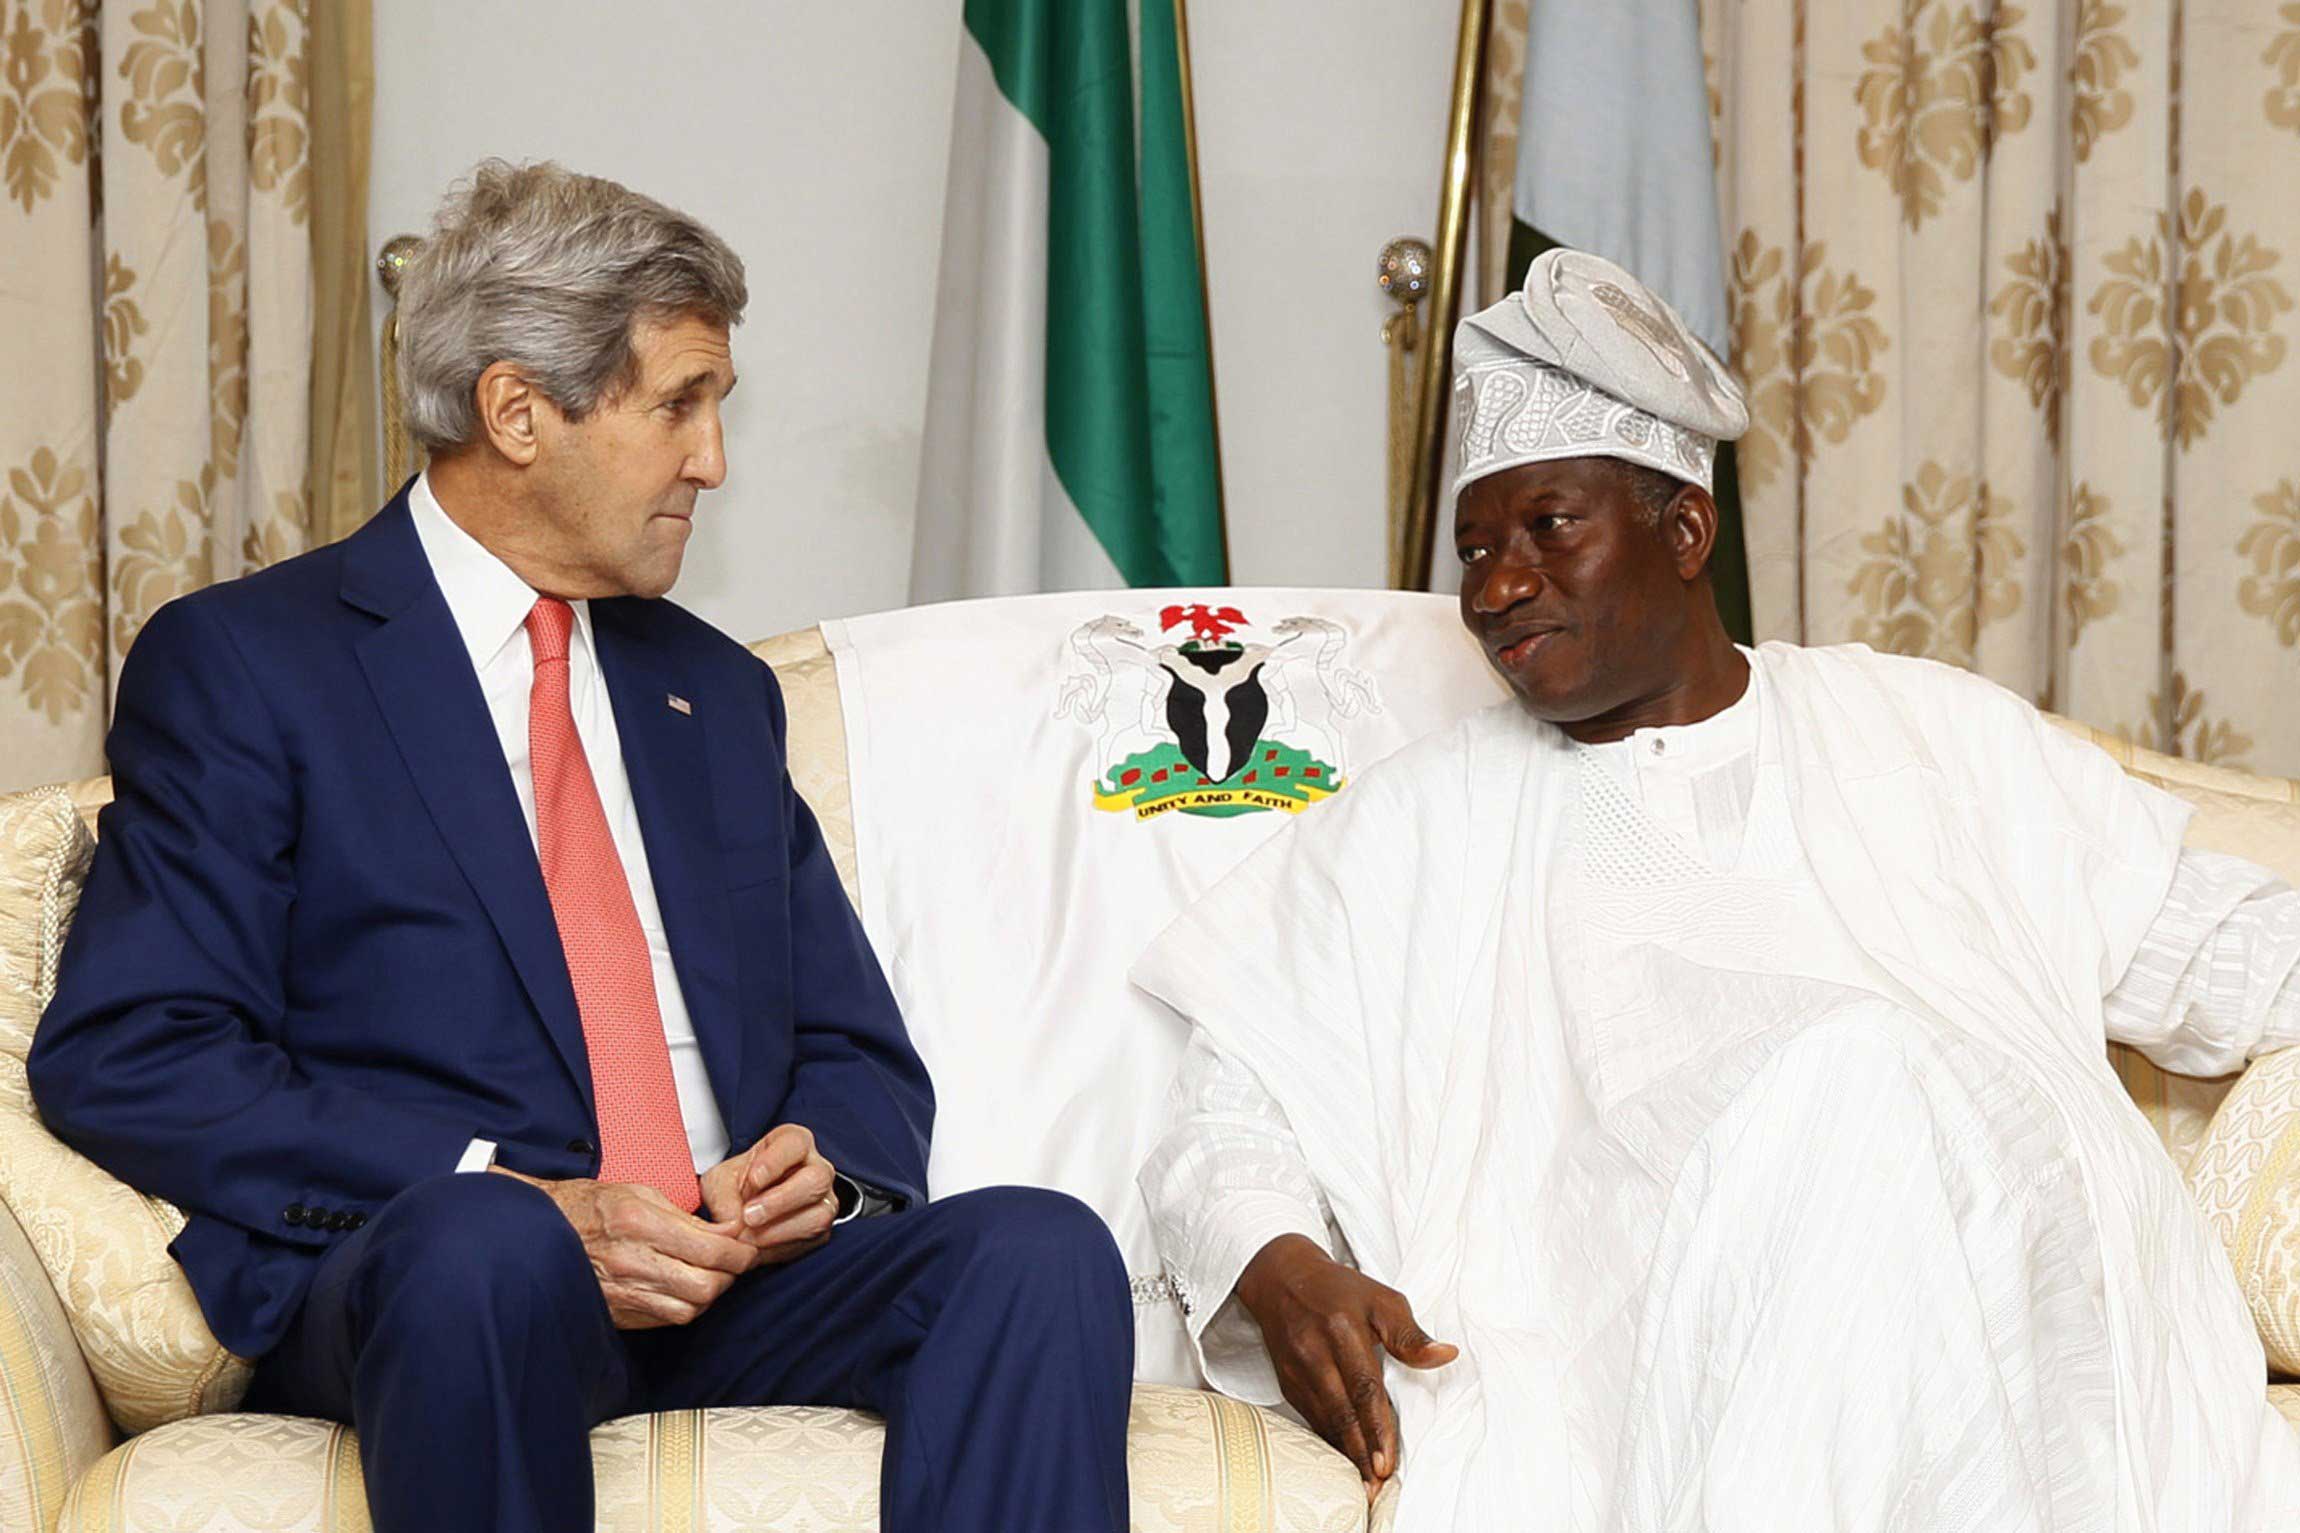 US Secretary of State John Kerry (L) meets with Nigeria's President Goodluck Jonathan to discuss peaceful elections at the State House in Lagos, Nigeria on Jan. 25, 2015. (Akintunde Akinleye—AFP/Getty Images)